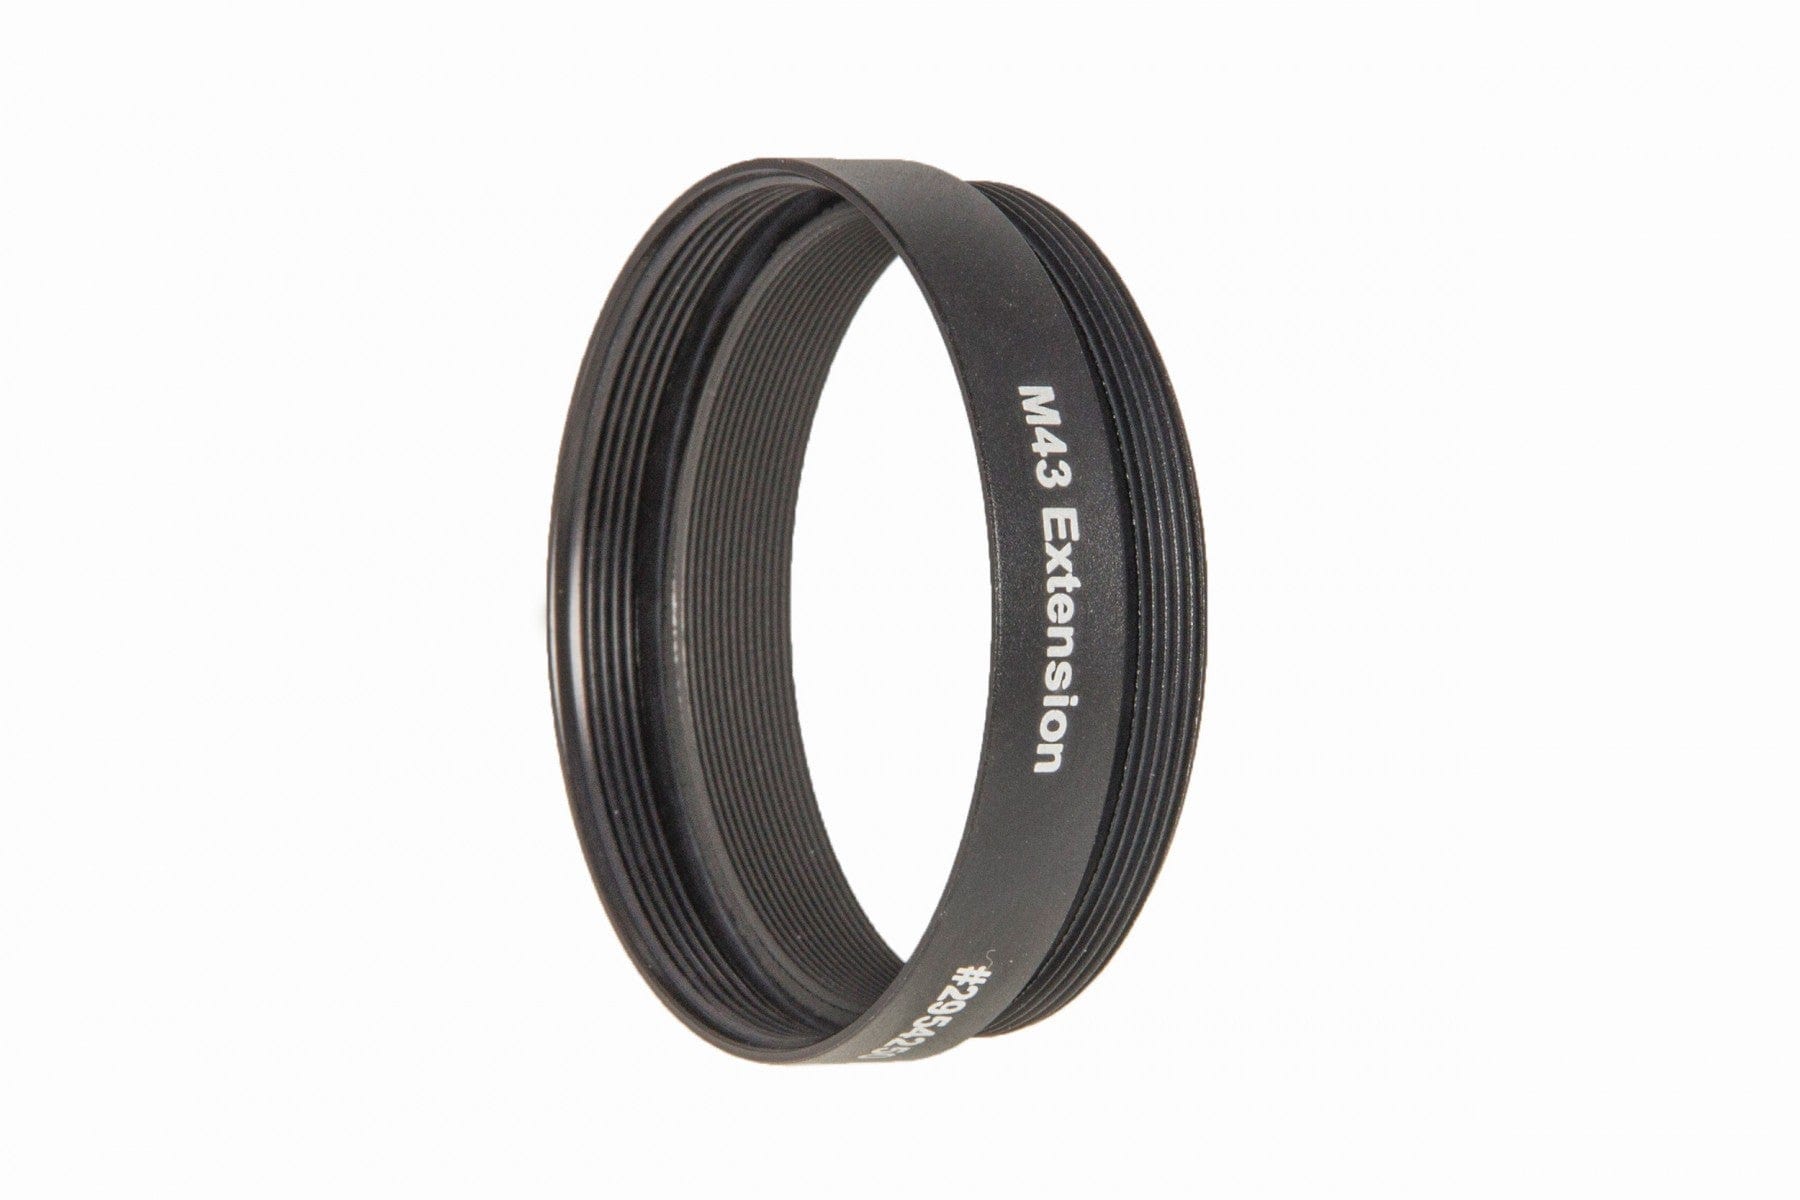 Baader Planetarium Accessory Baader Spacer Ring M43/7.5 for Morpheus and Hyperion Eyepieces - 2954250